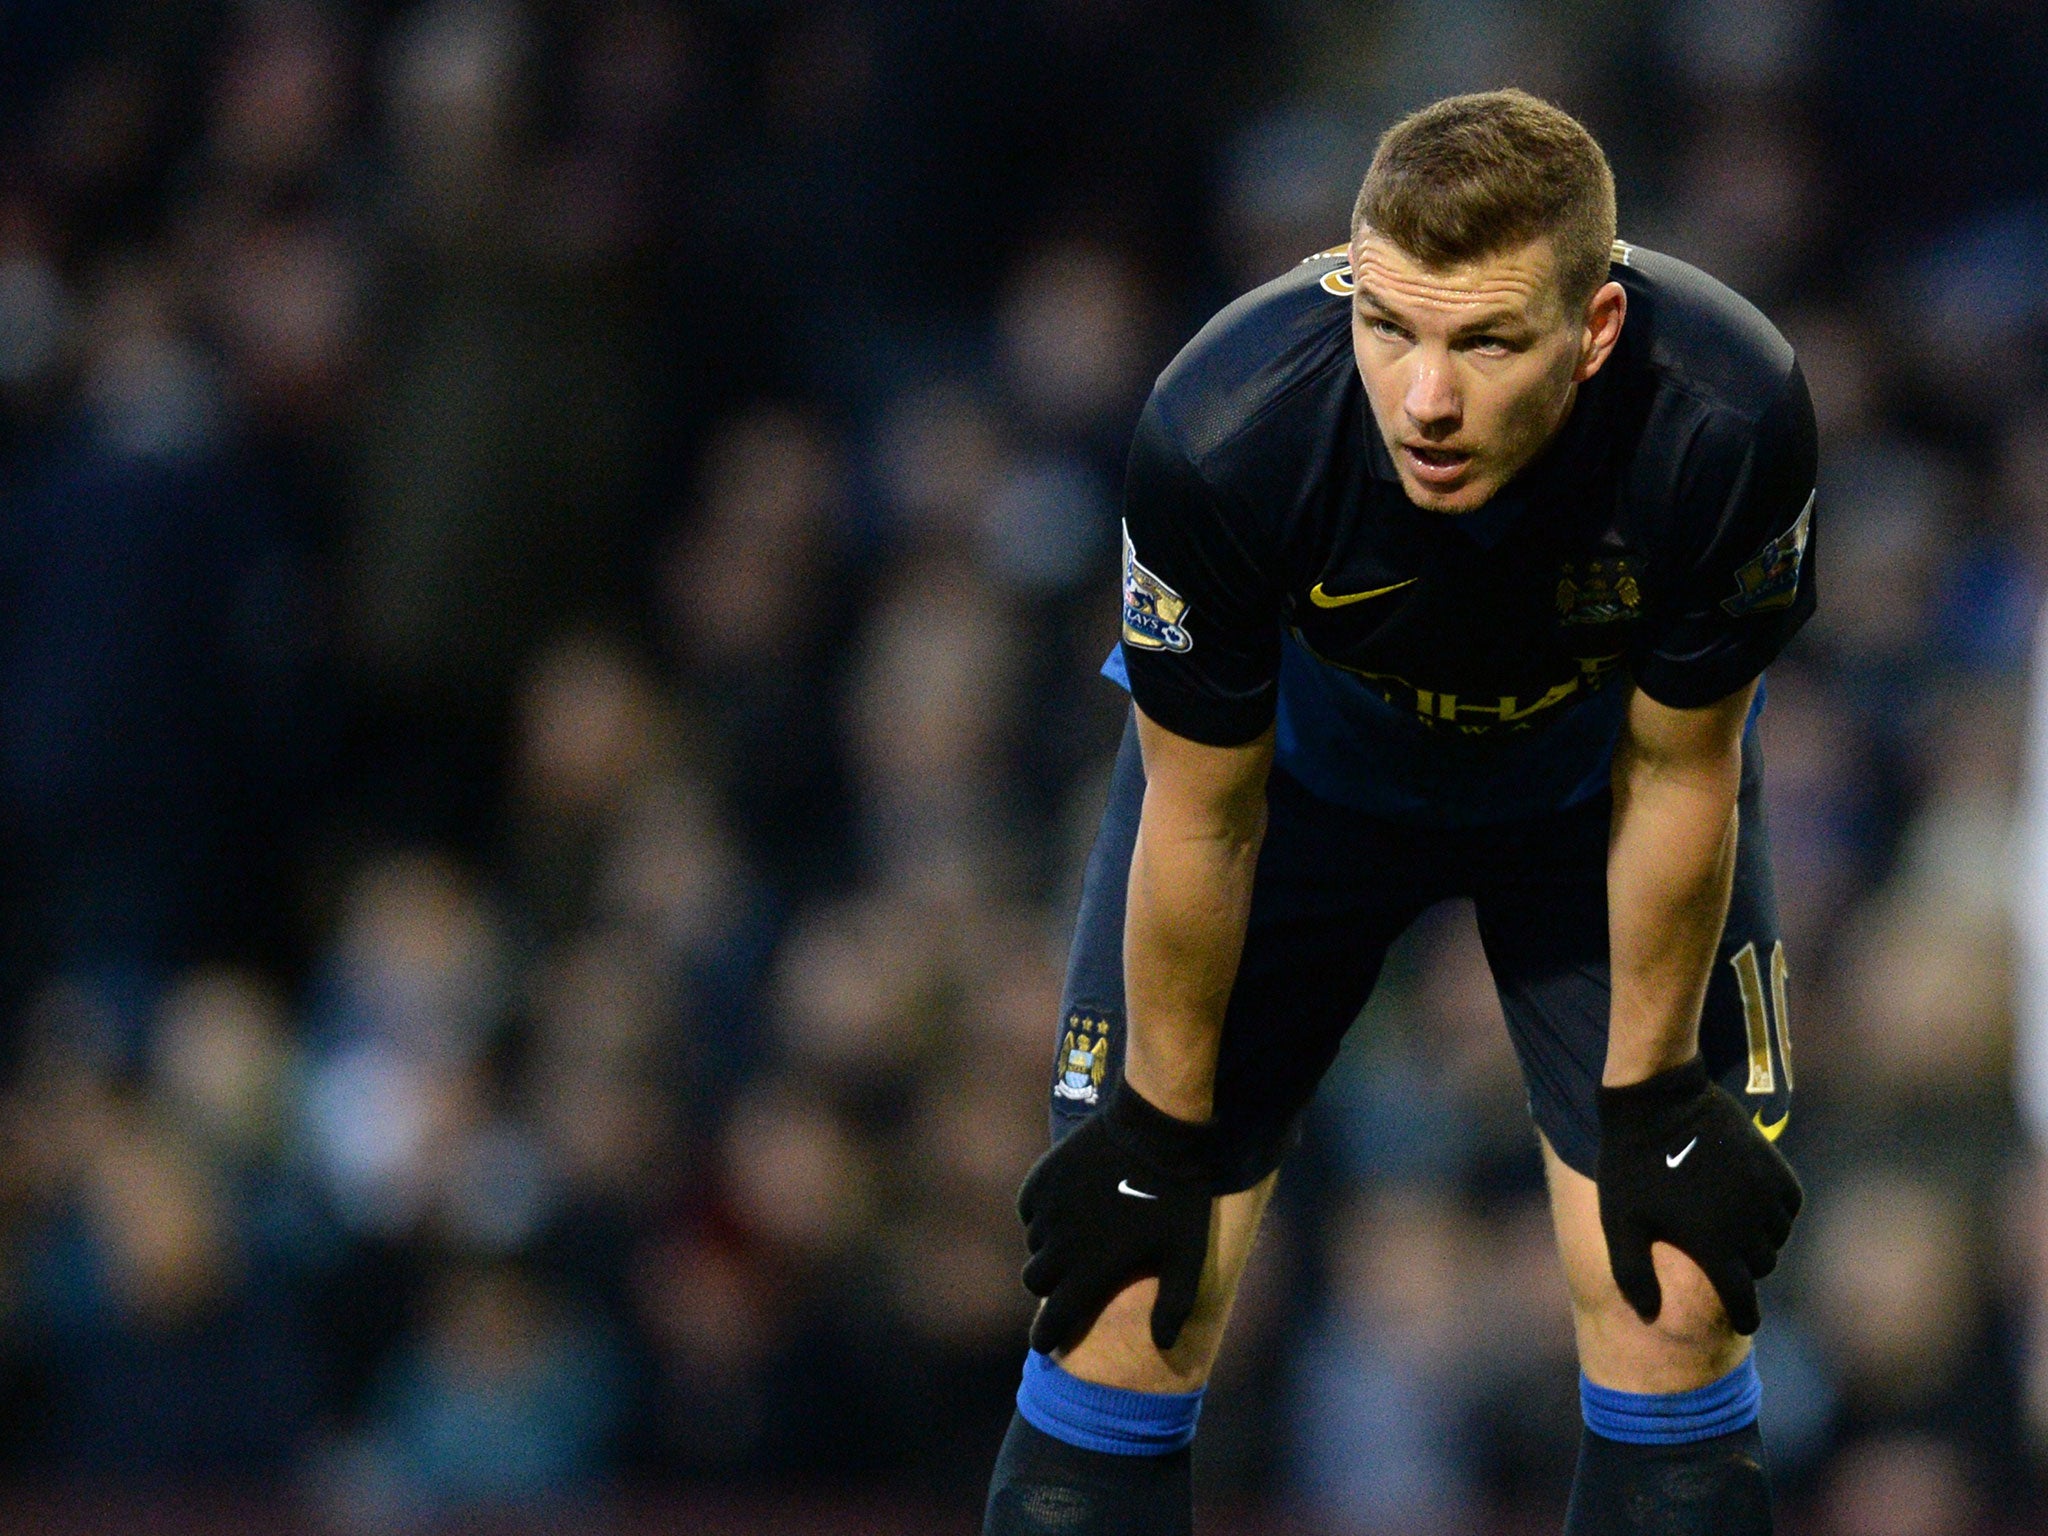 Edin Dzeko could pay the price for Manchester City's poor form